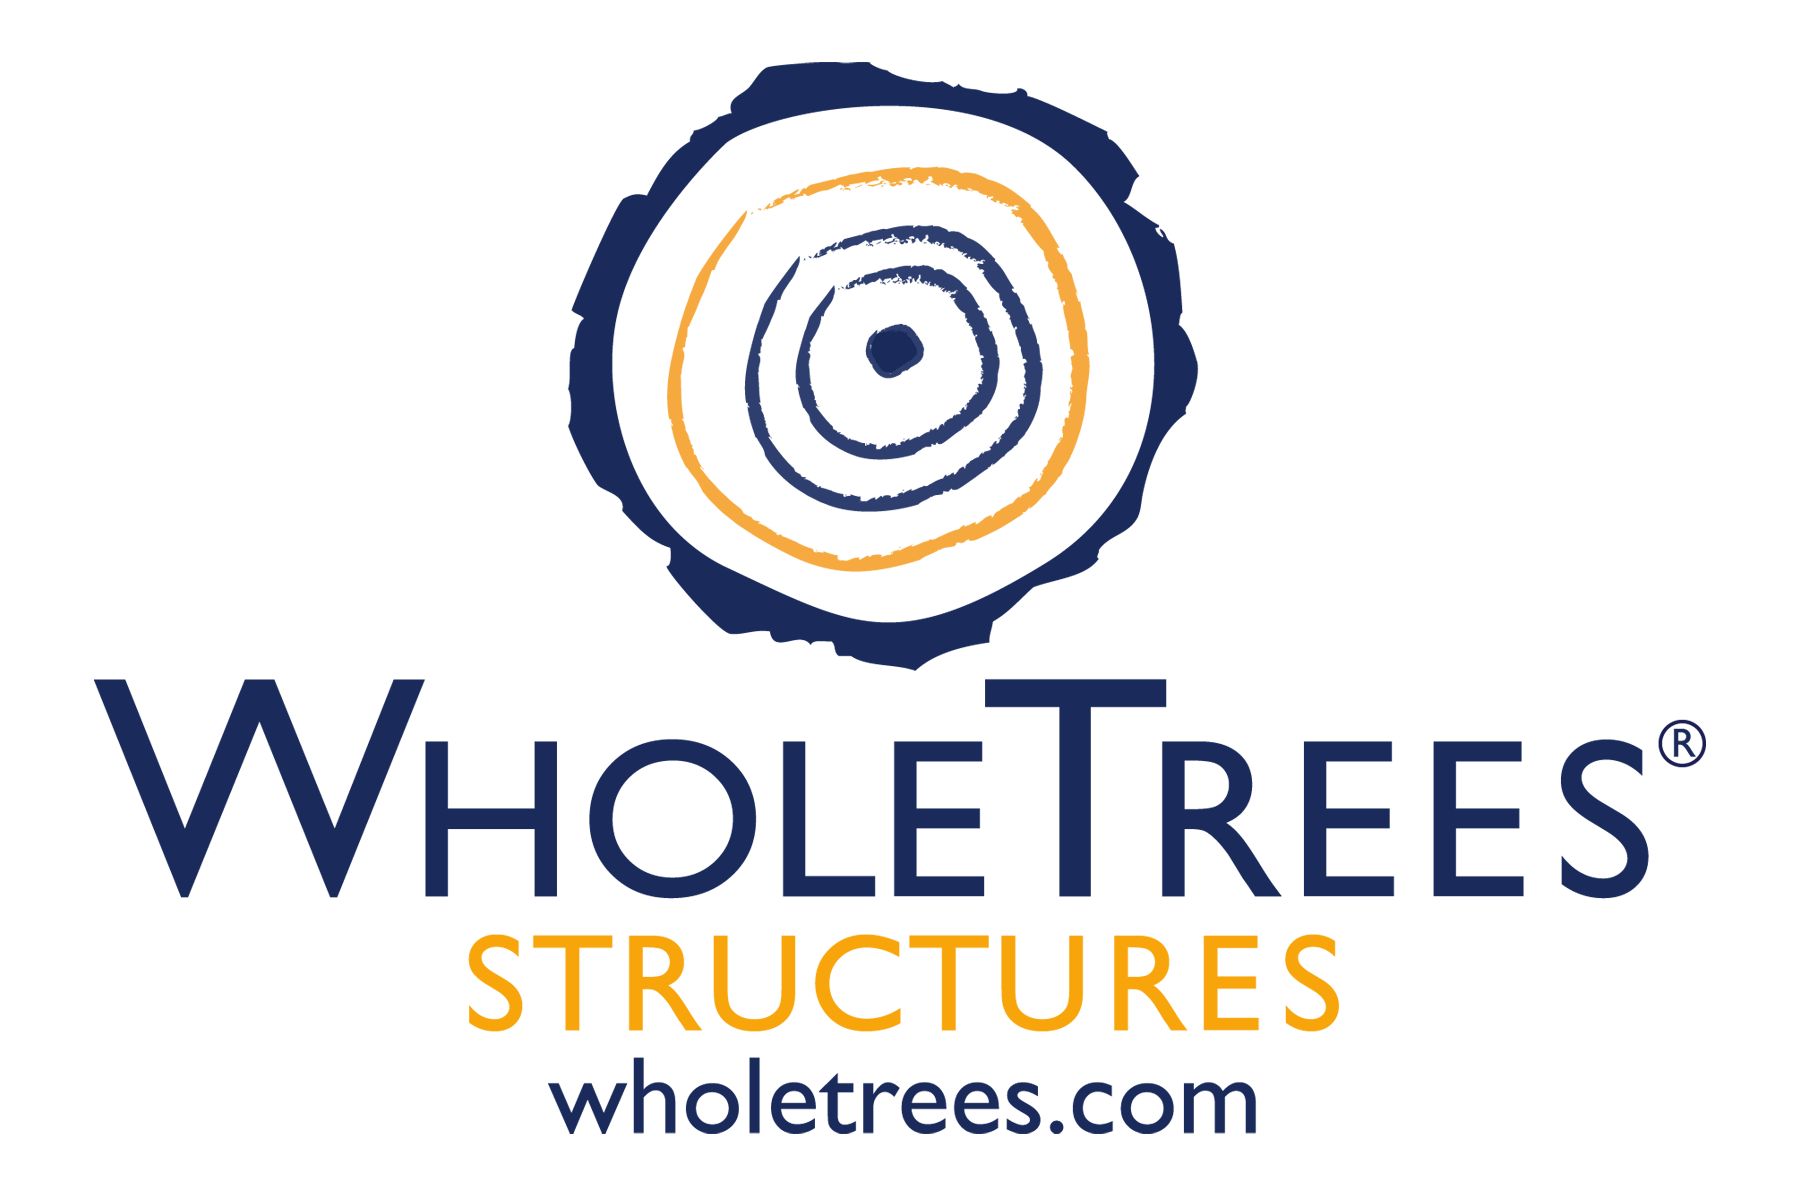 WholeTrees